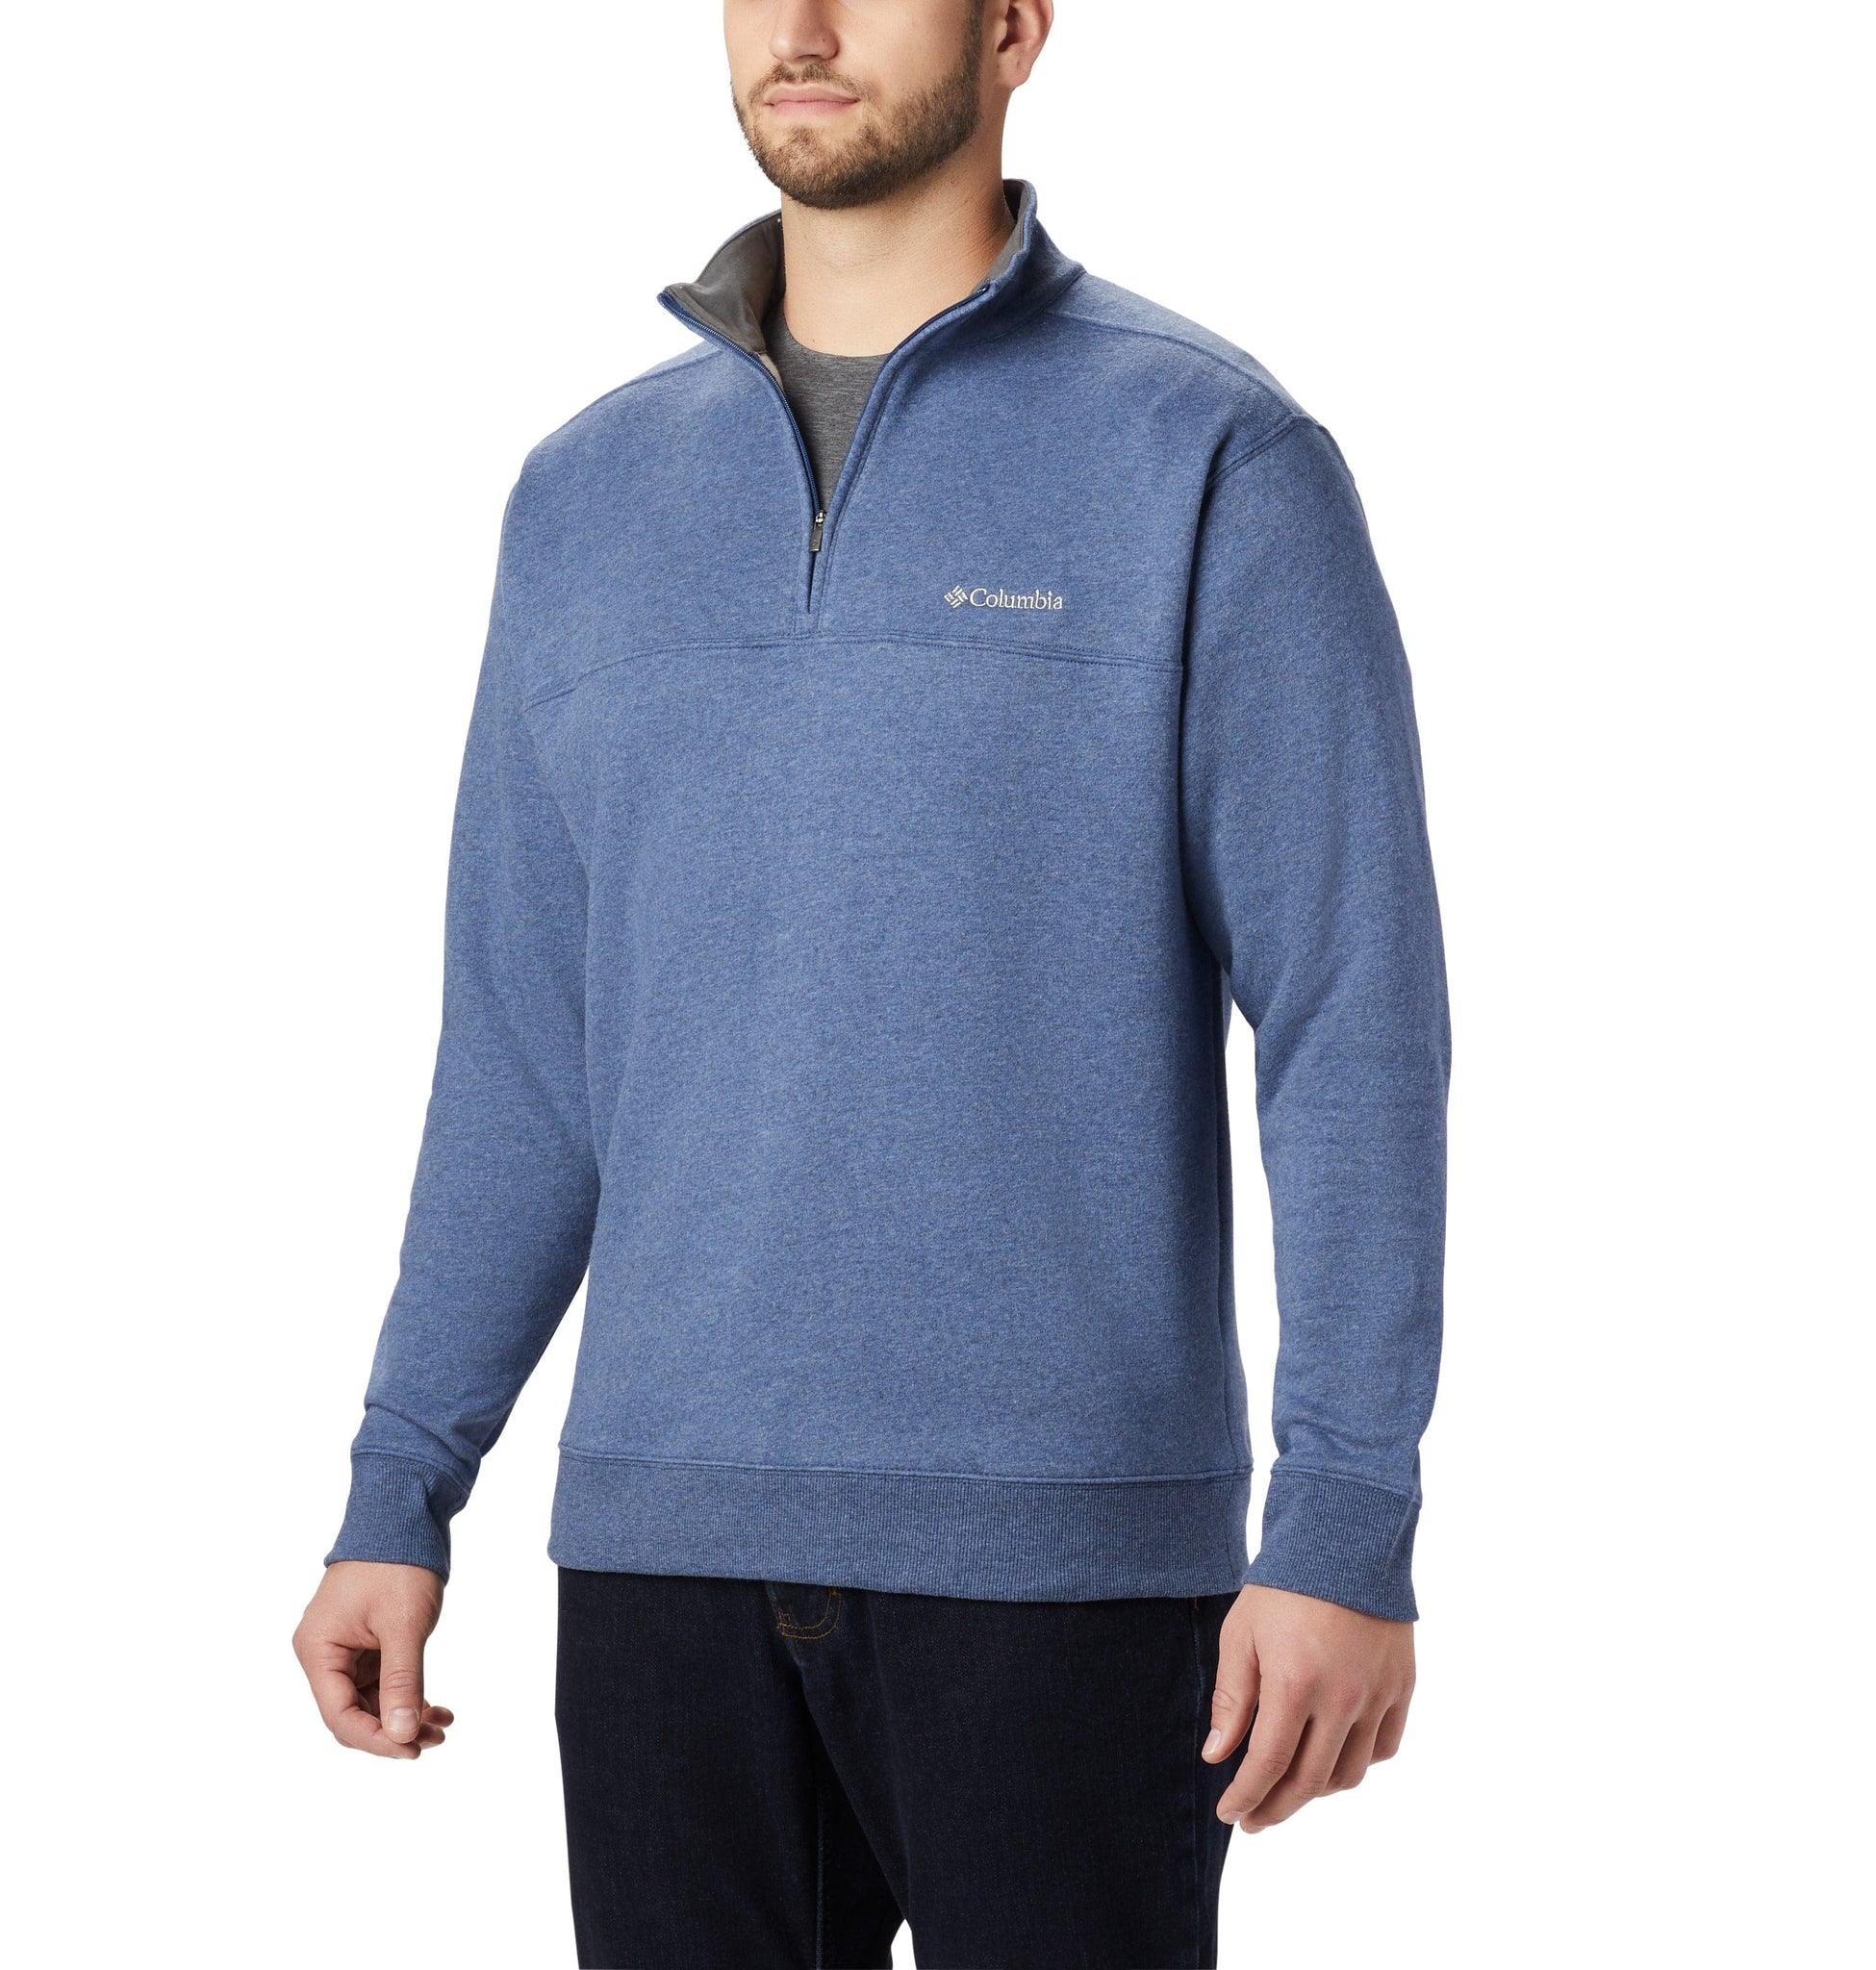 Columbia Men's PFG Uncharted Hoodie, Small, Bluebell Heather